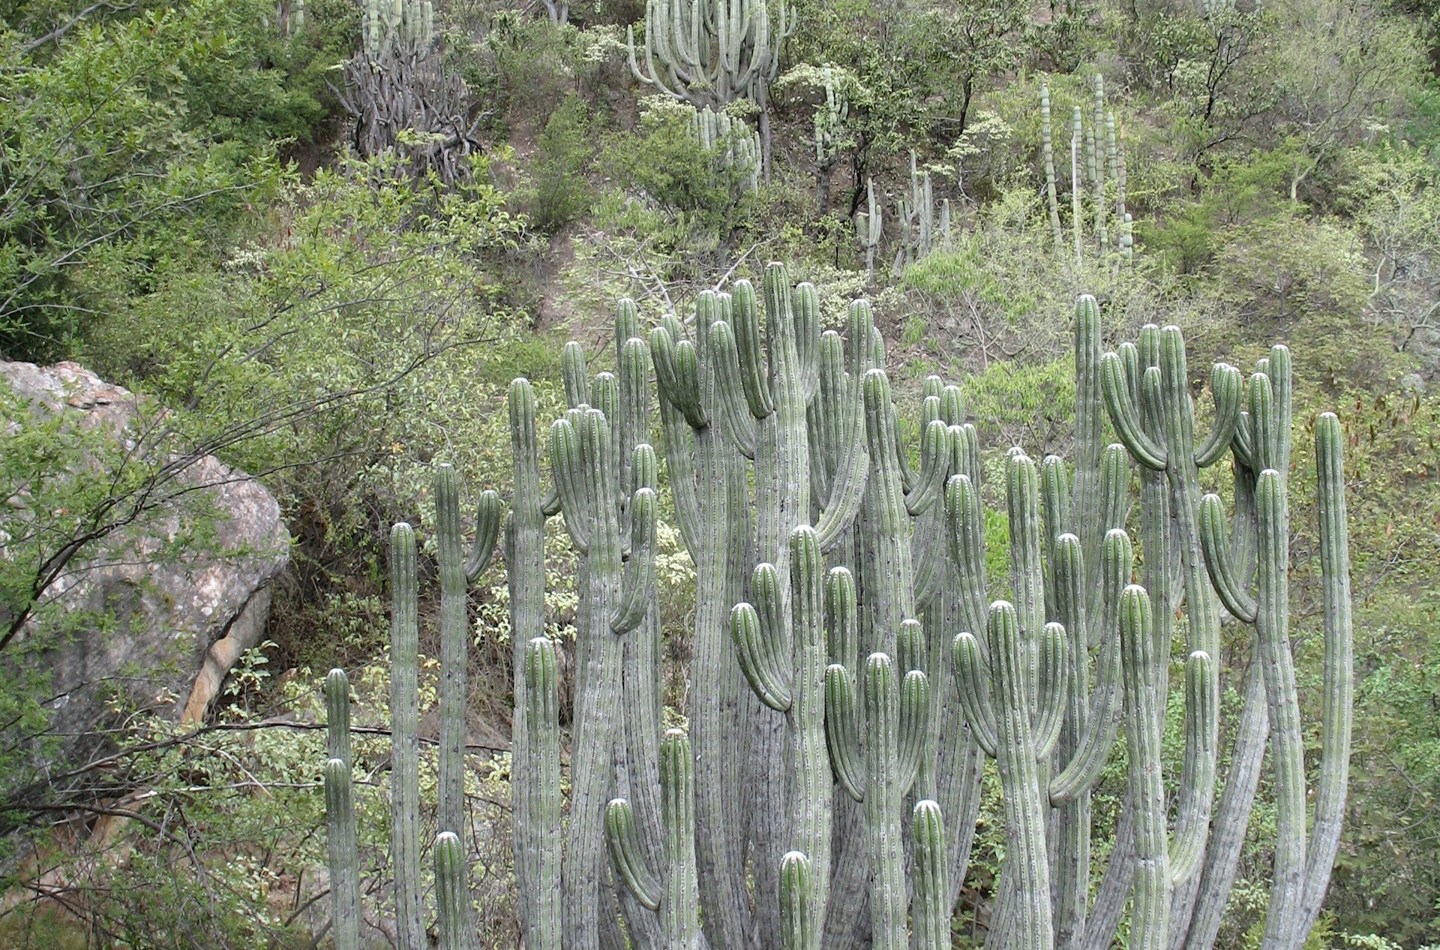 A steep dry slope with large boulders covered in spiny shrubs and large candelabra like cacti.